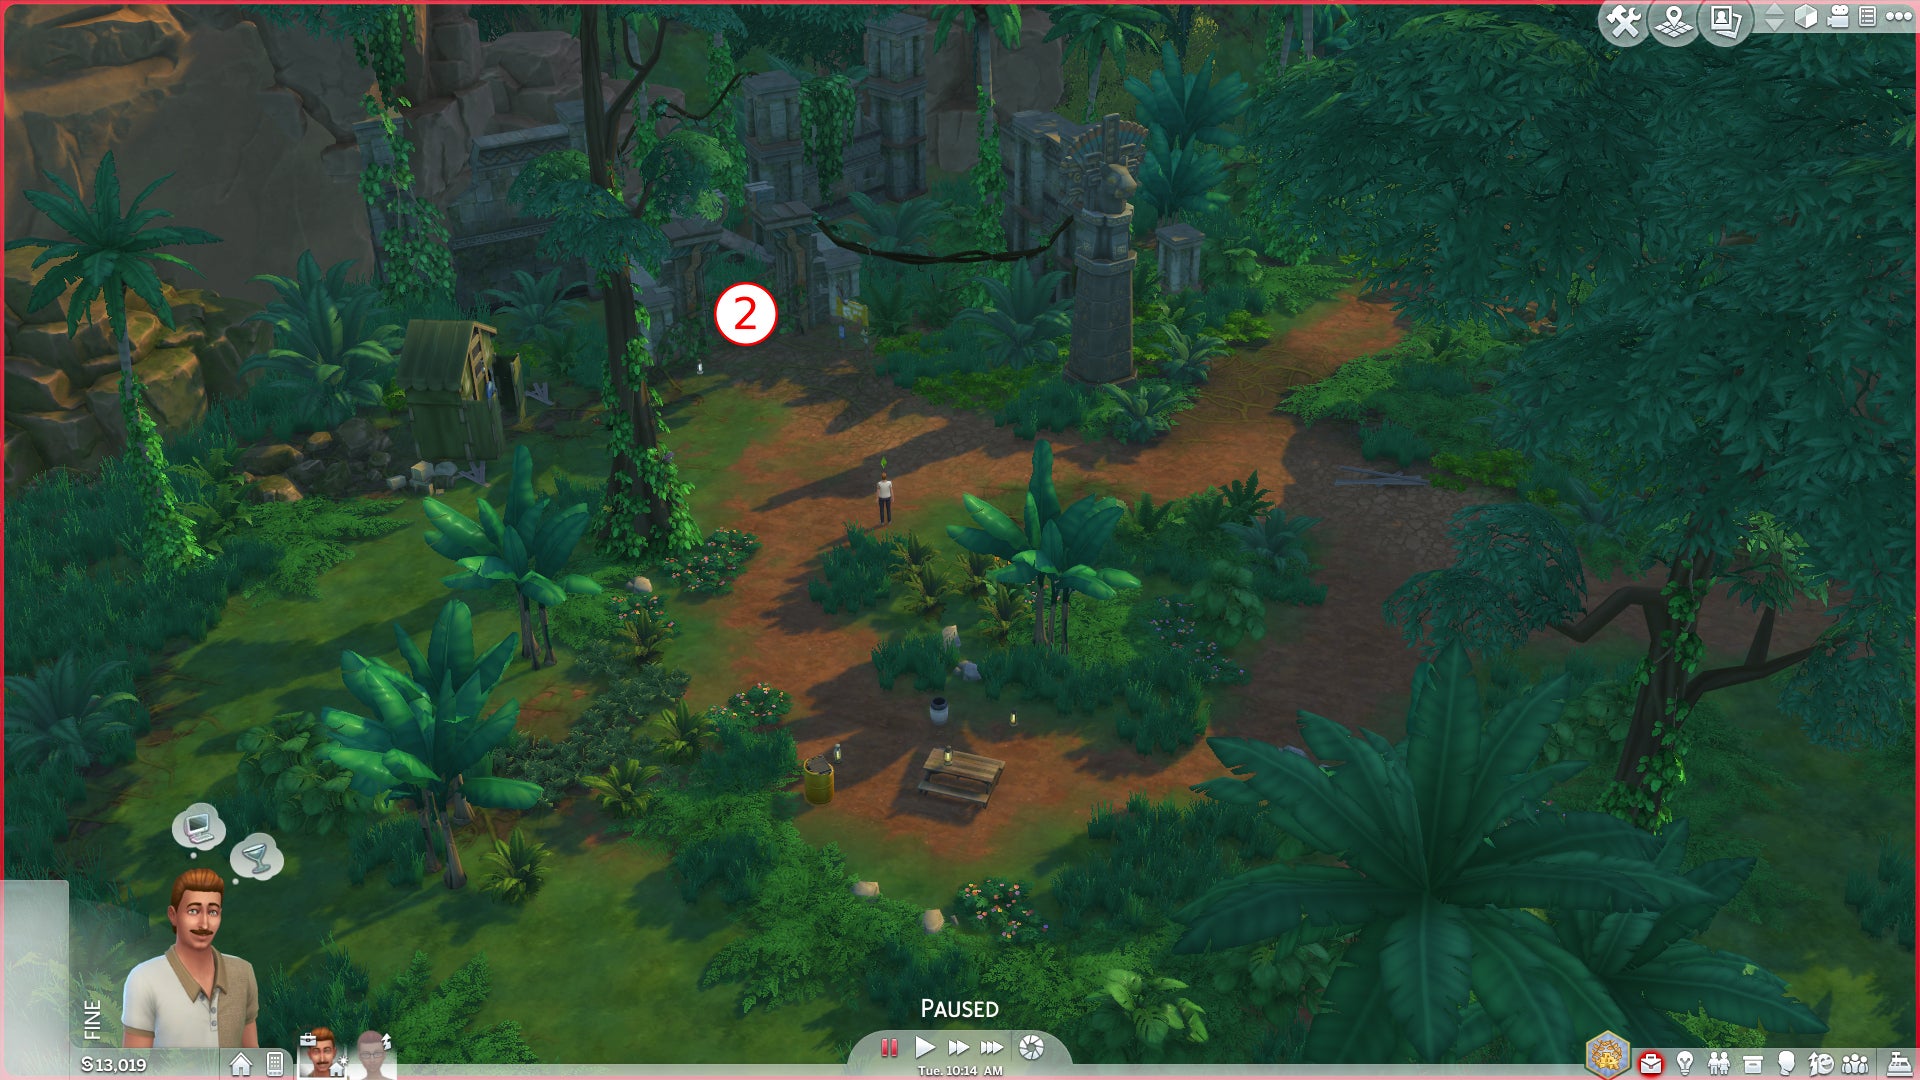 Jungle Maps – The Sims 4 Guide